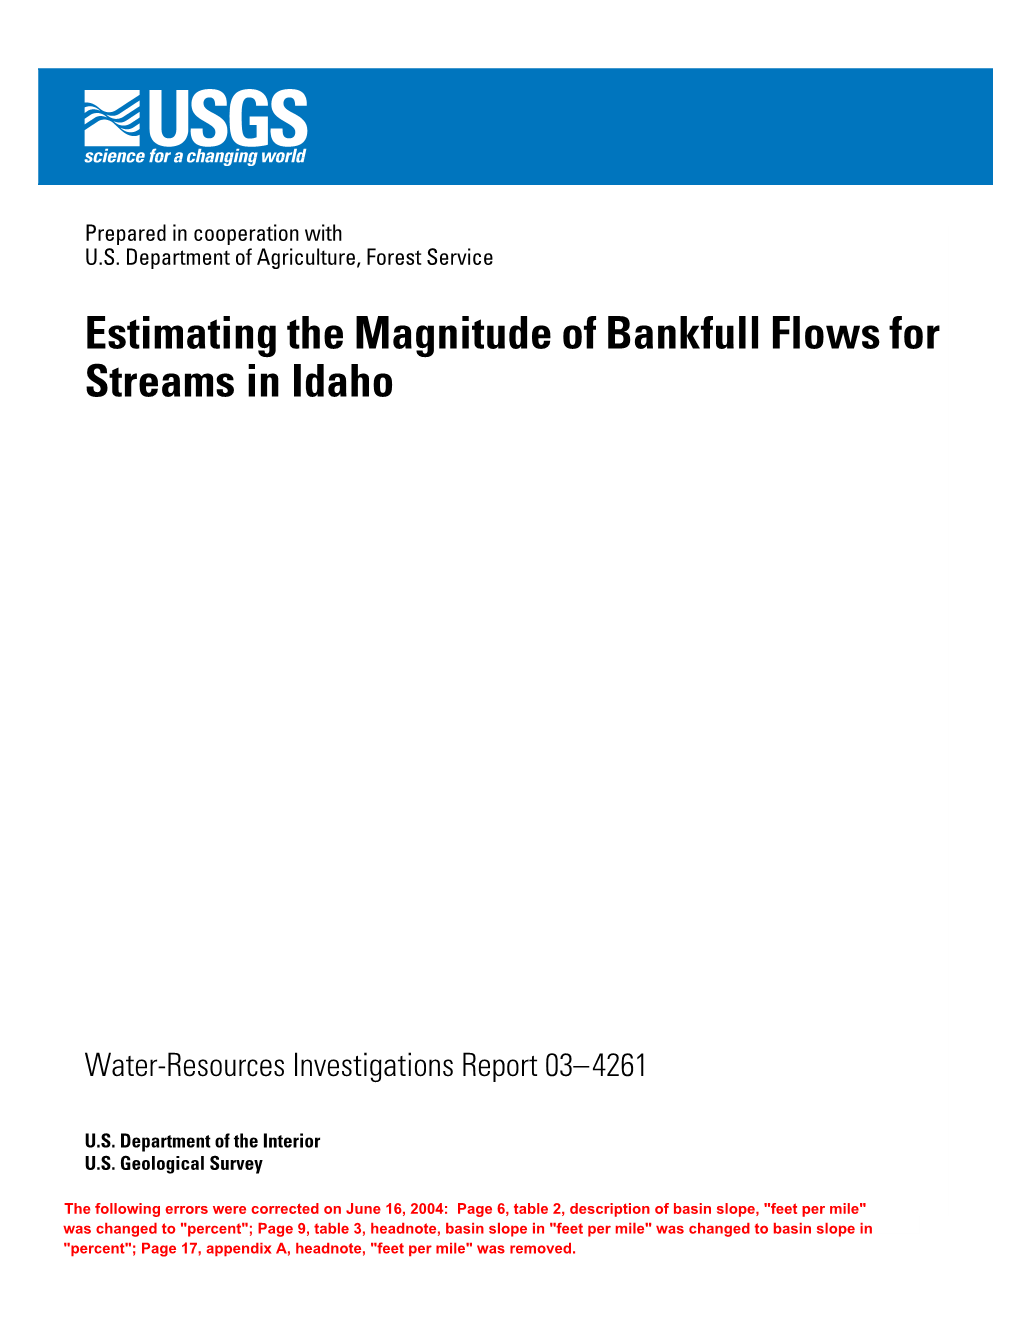 Estimating the Magnitude of Bankfull Flows for Streams in Idaho